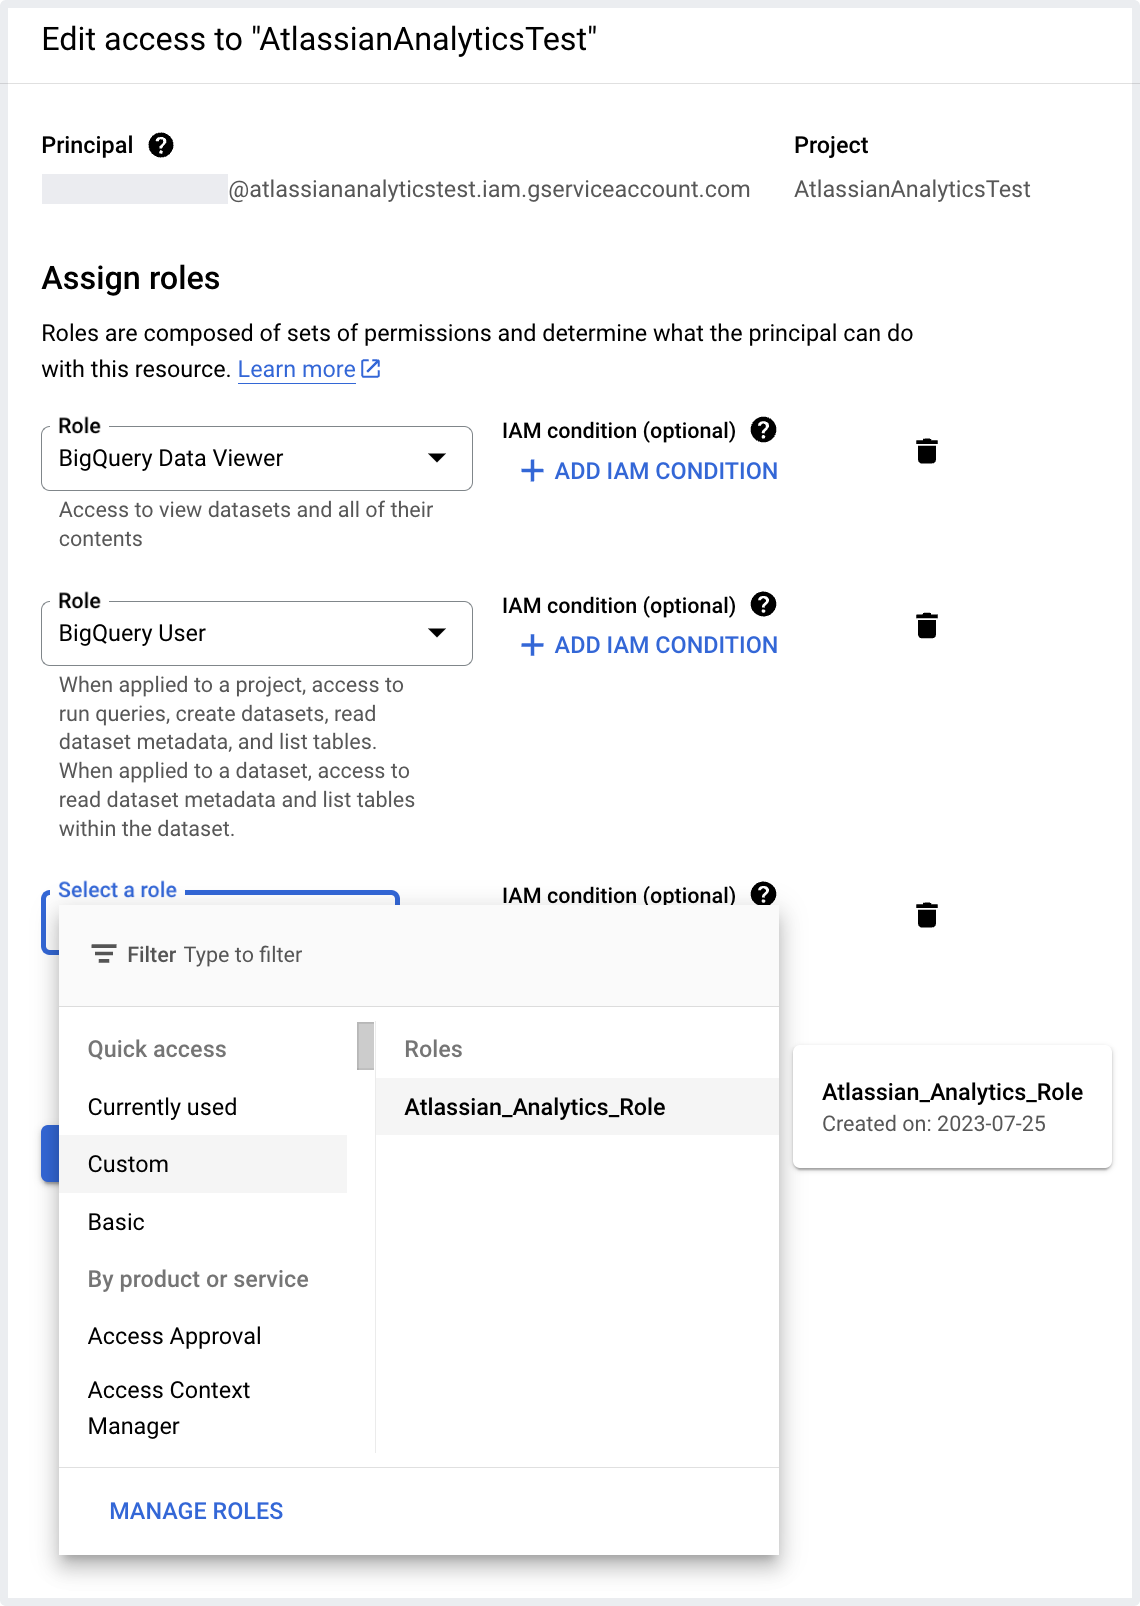 Adding "Atlassian_Analytics_Role" custom role to existing service account